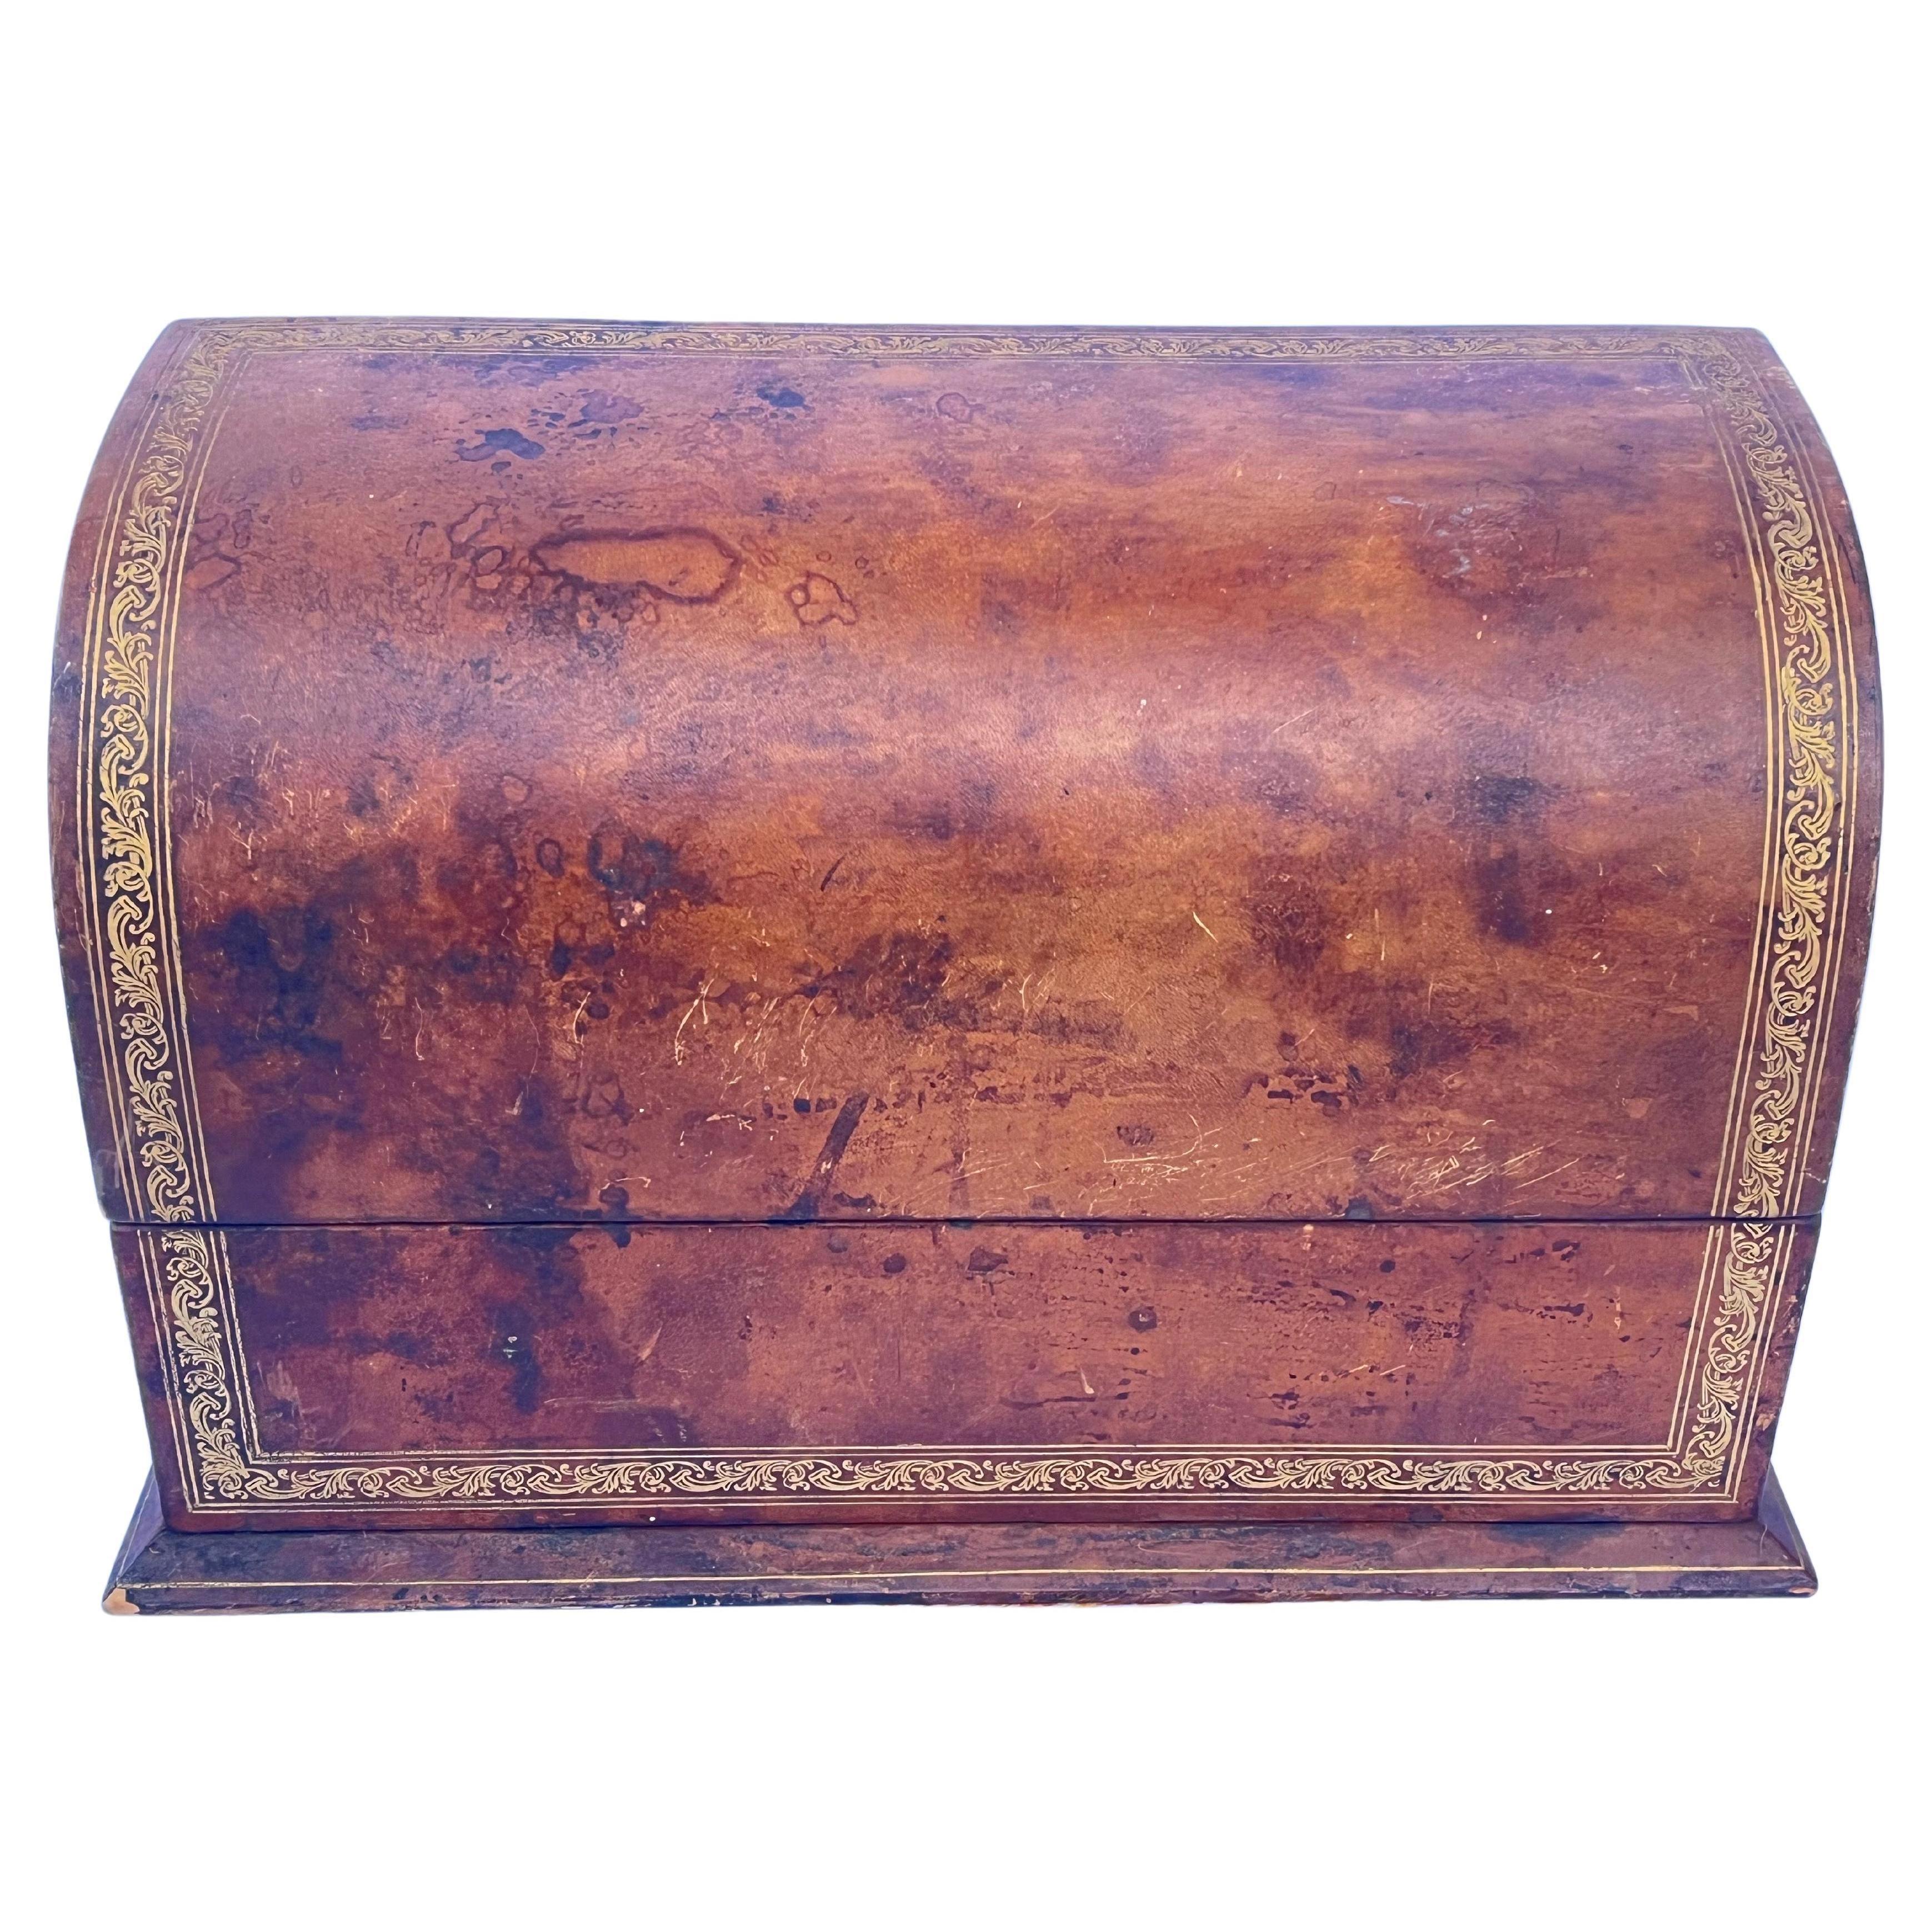 A vintage mid twentieth century Italian leather and gold leaf design half dome letter box or desk accessory. Gorgeous, worn and well loved patina. Lined in a beautiful orange-y fabric. The cigar / chocolate brown leather exterior is regal and